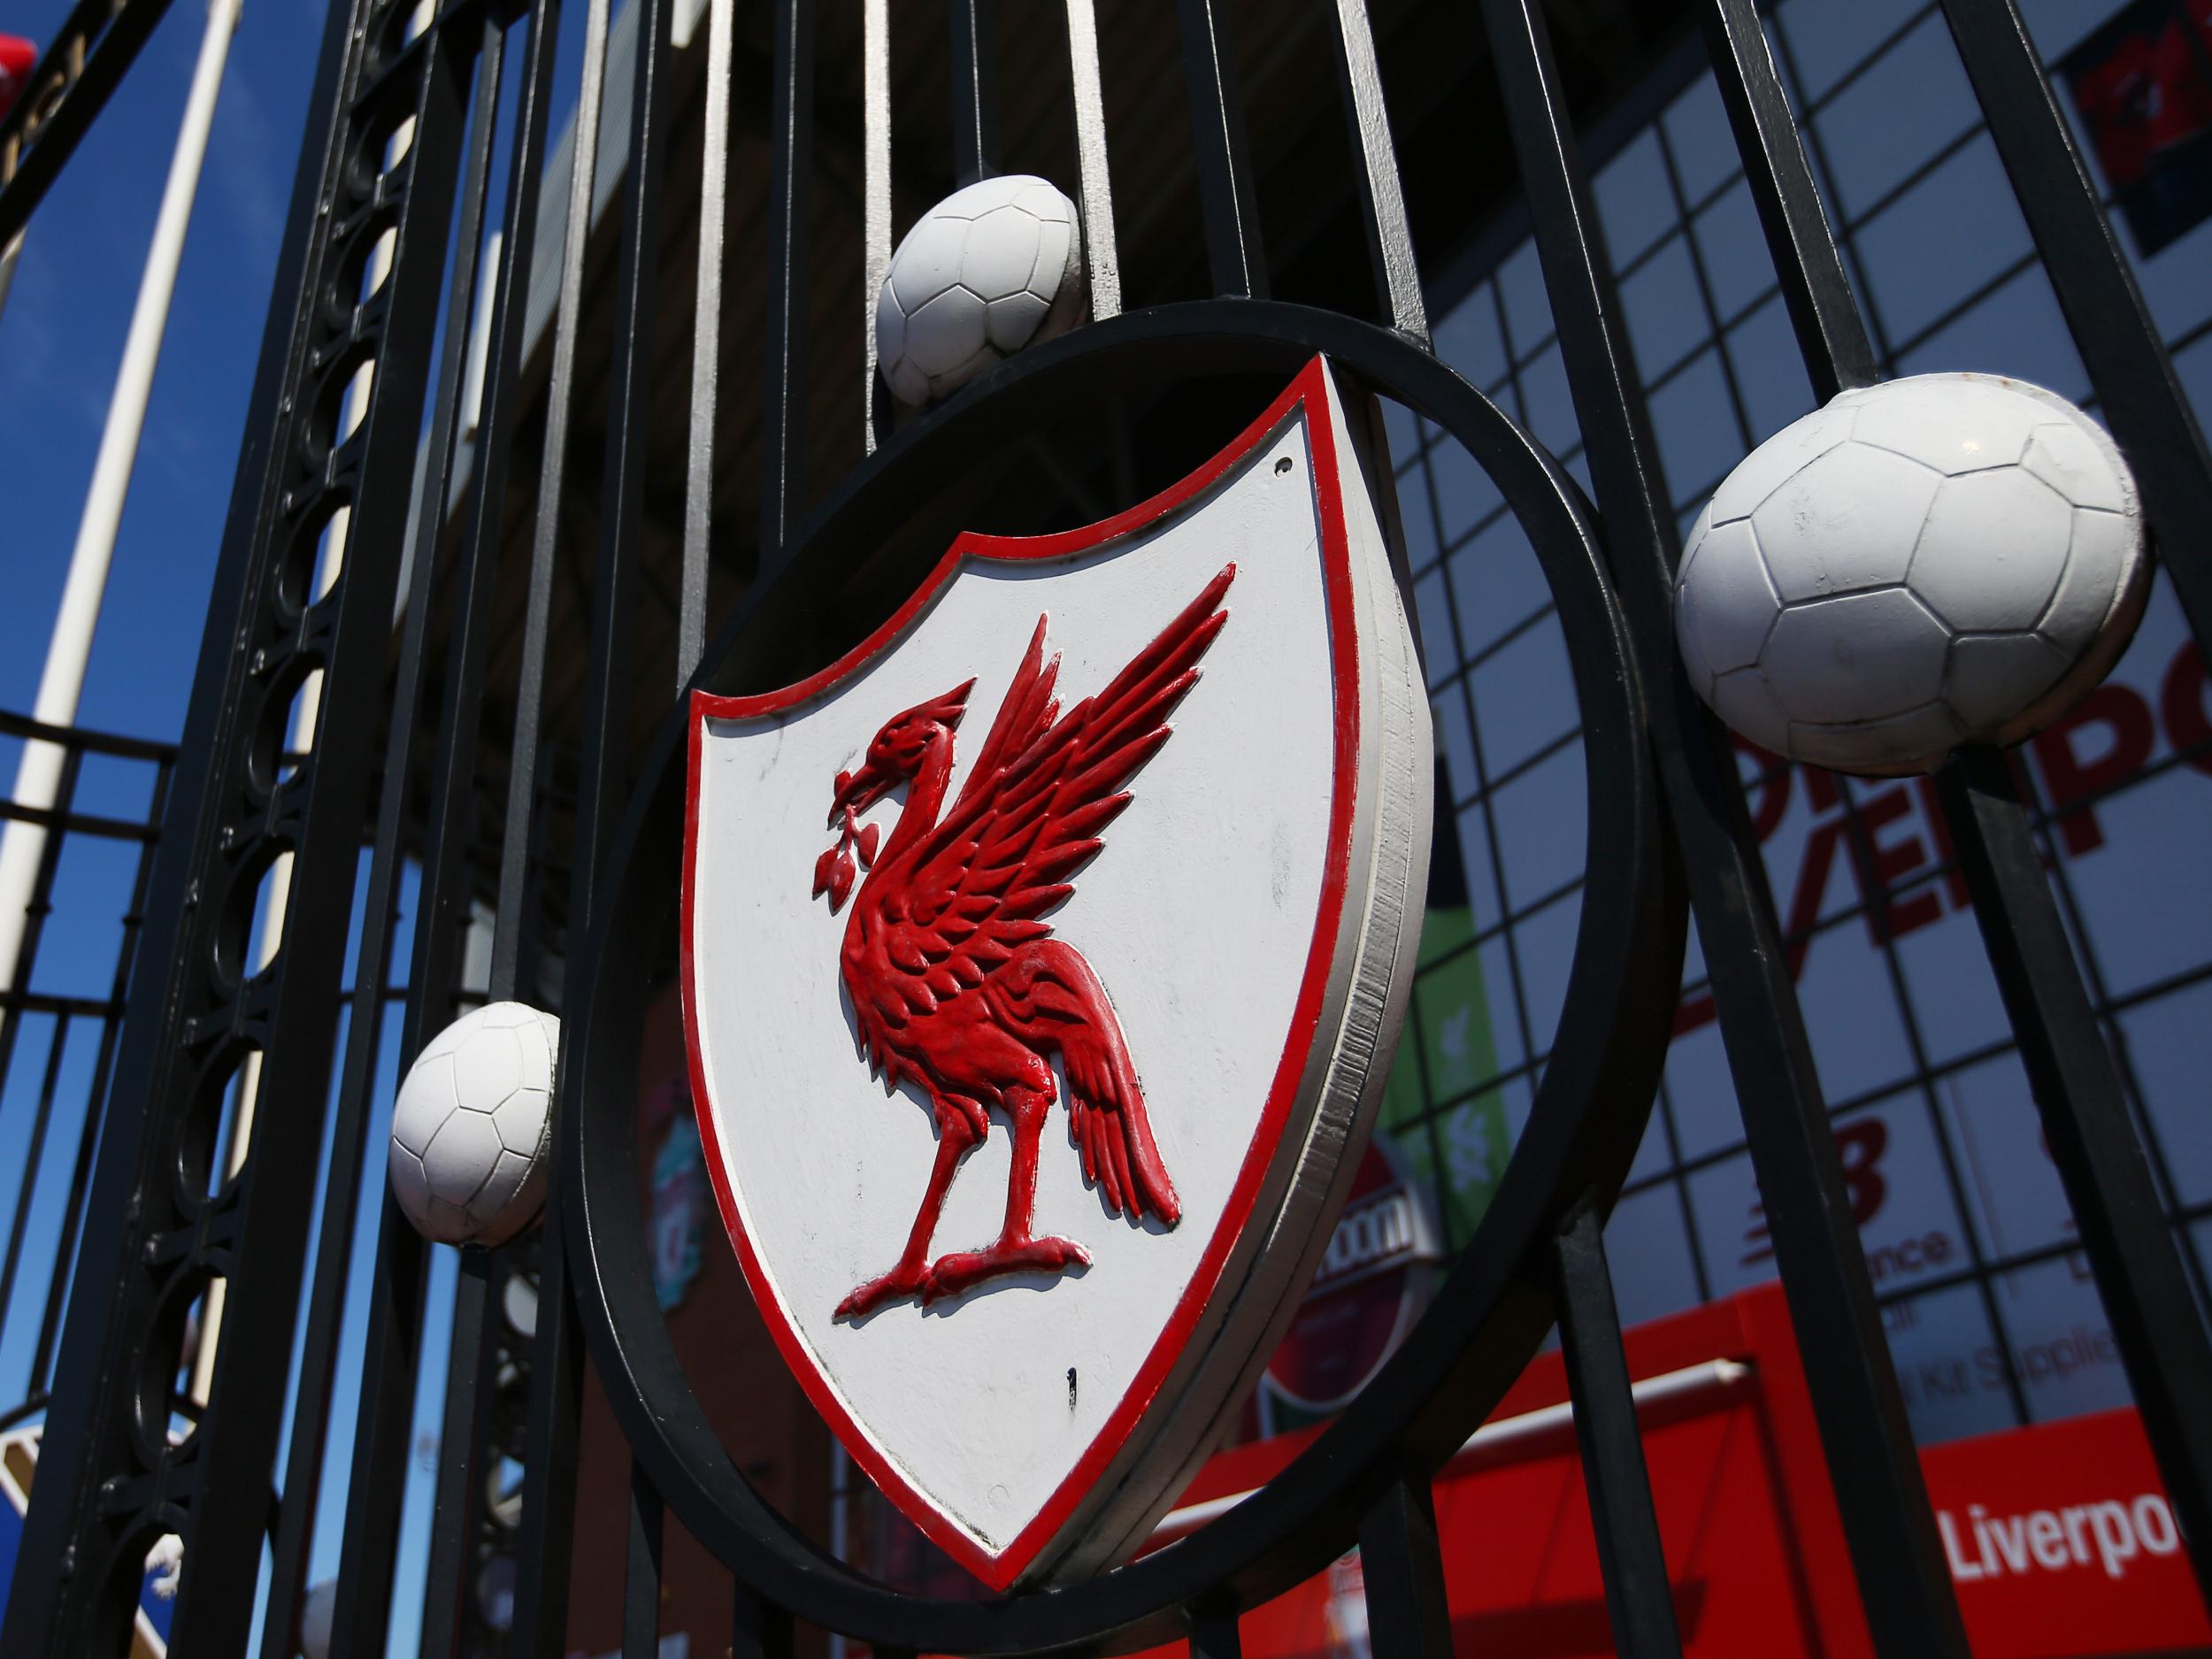 Liverpool chairman Tom Werner rubbishes reports of £1.5bn takeover bid for the club